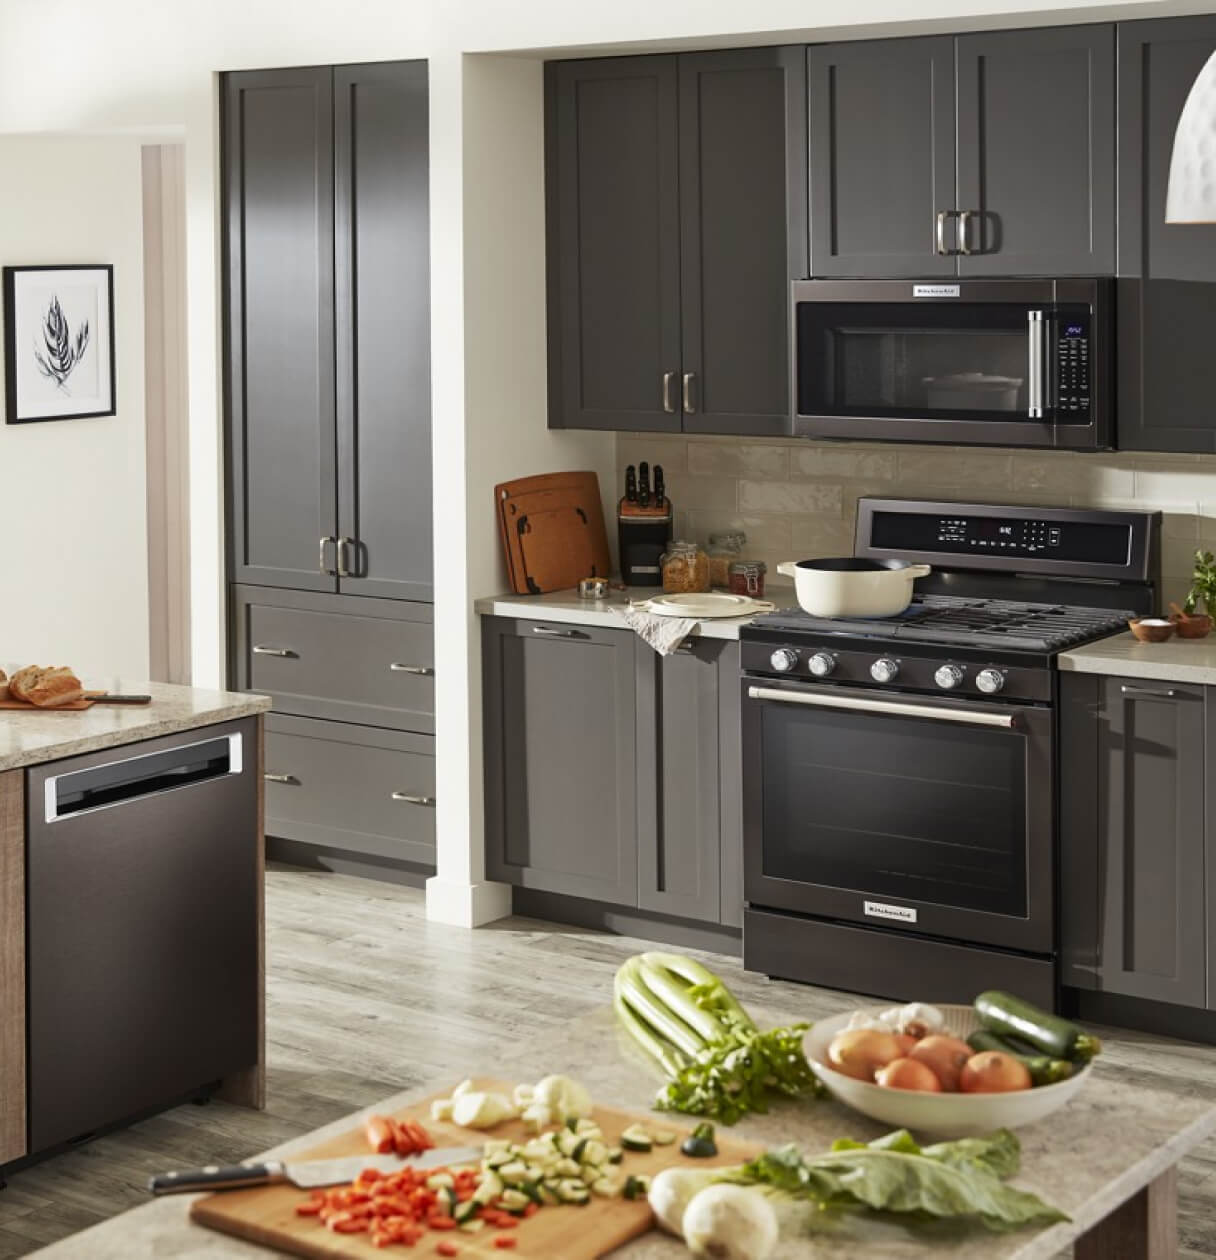 Black stainless appliances in a kitchen with grey cabinets.